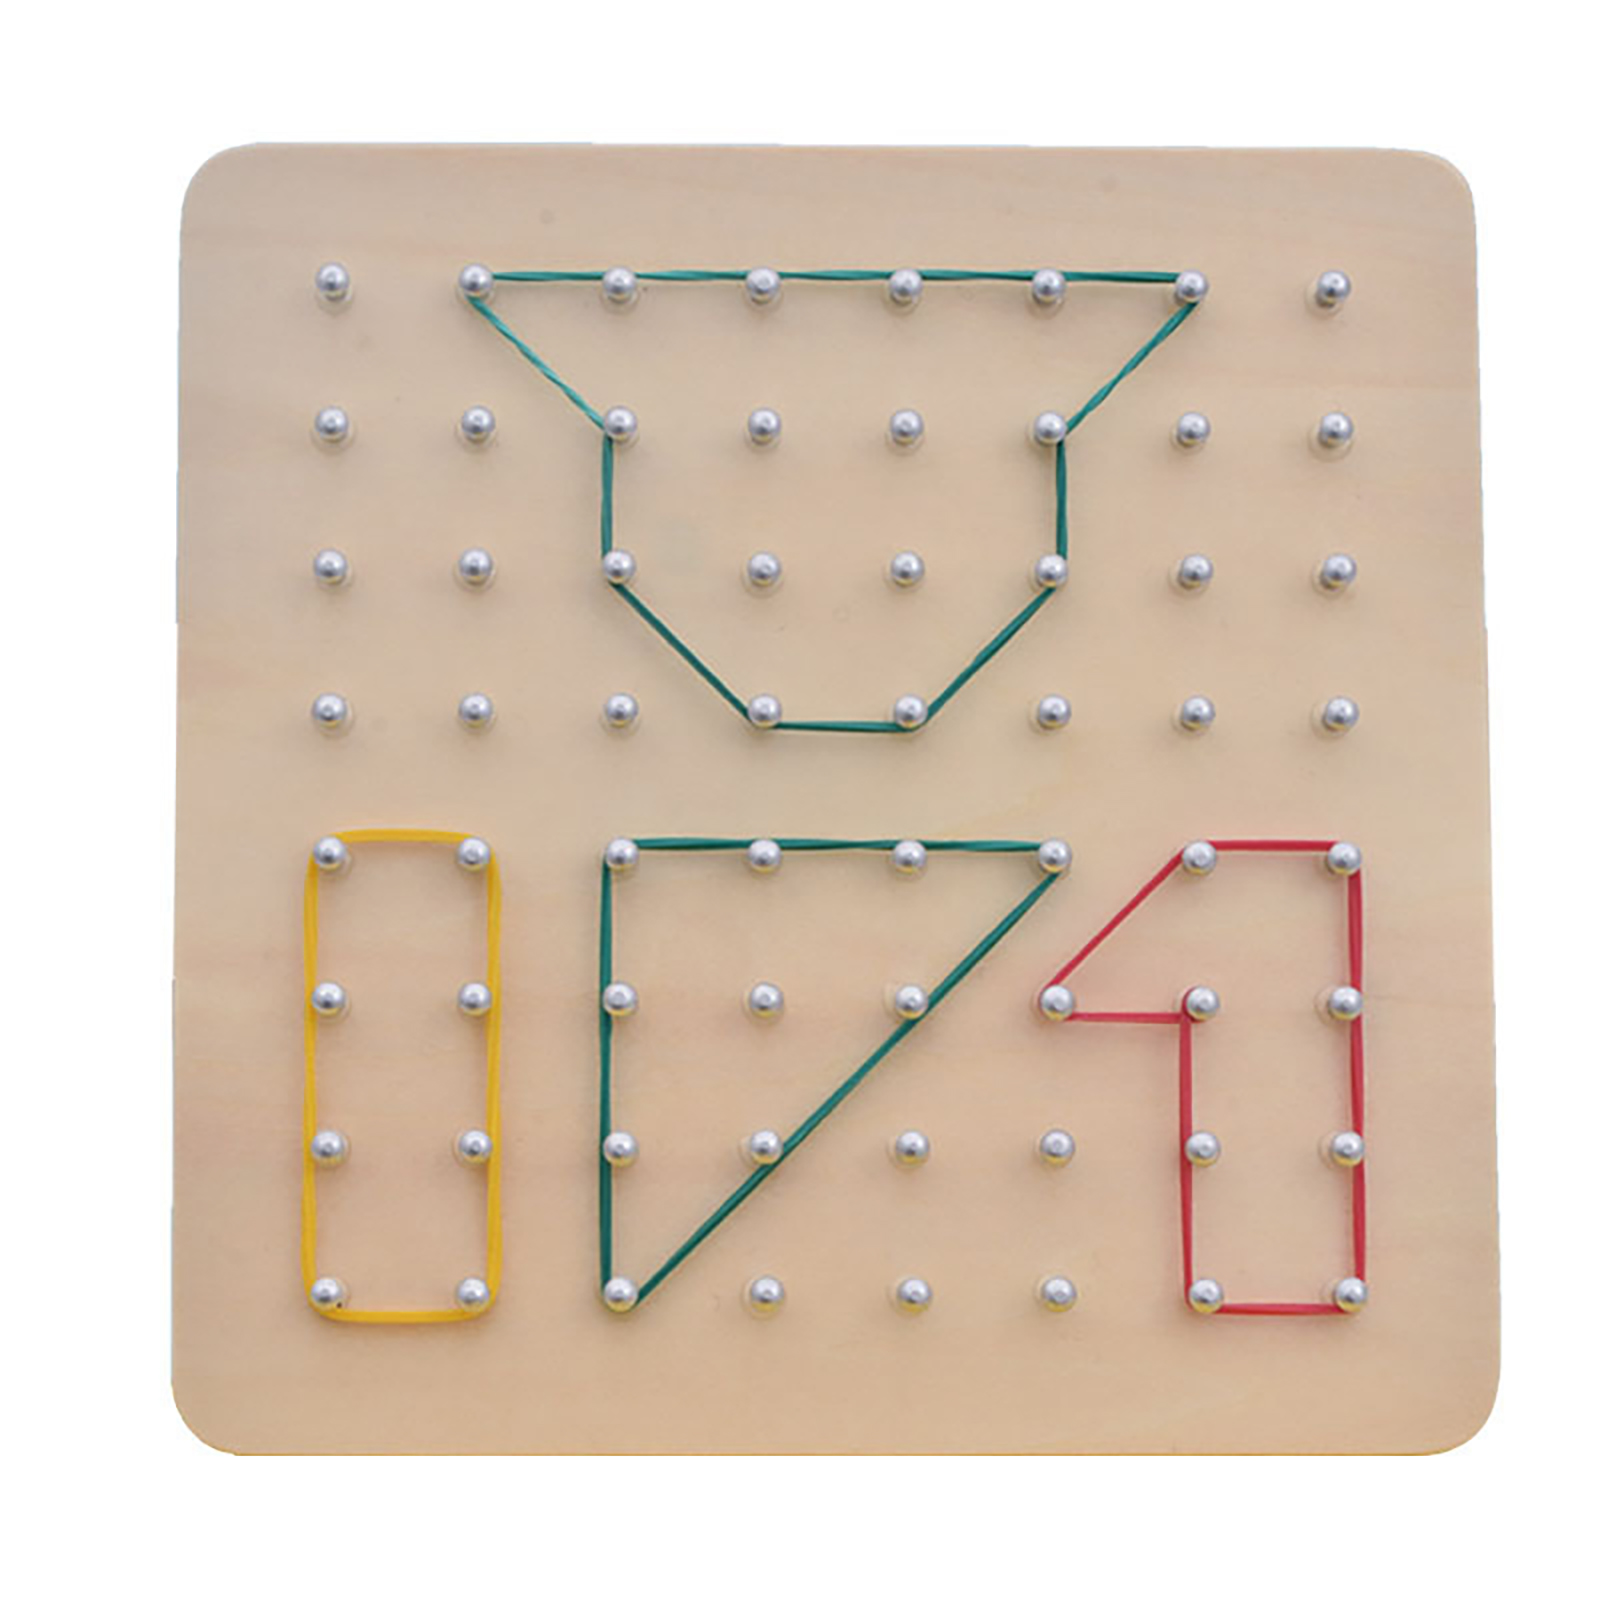 79pcs/88pcs Wooden Geoboard With Rubber Bands Math Pattern Blocks Geo Board With Pattern Cards Educational Toy For Kids Birthday Gifts